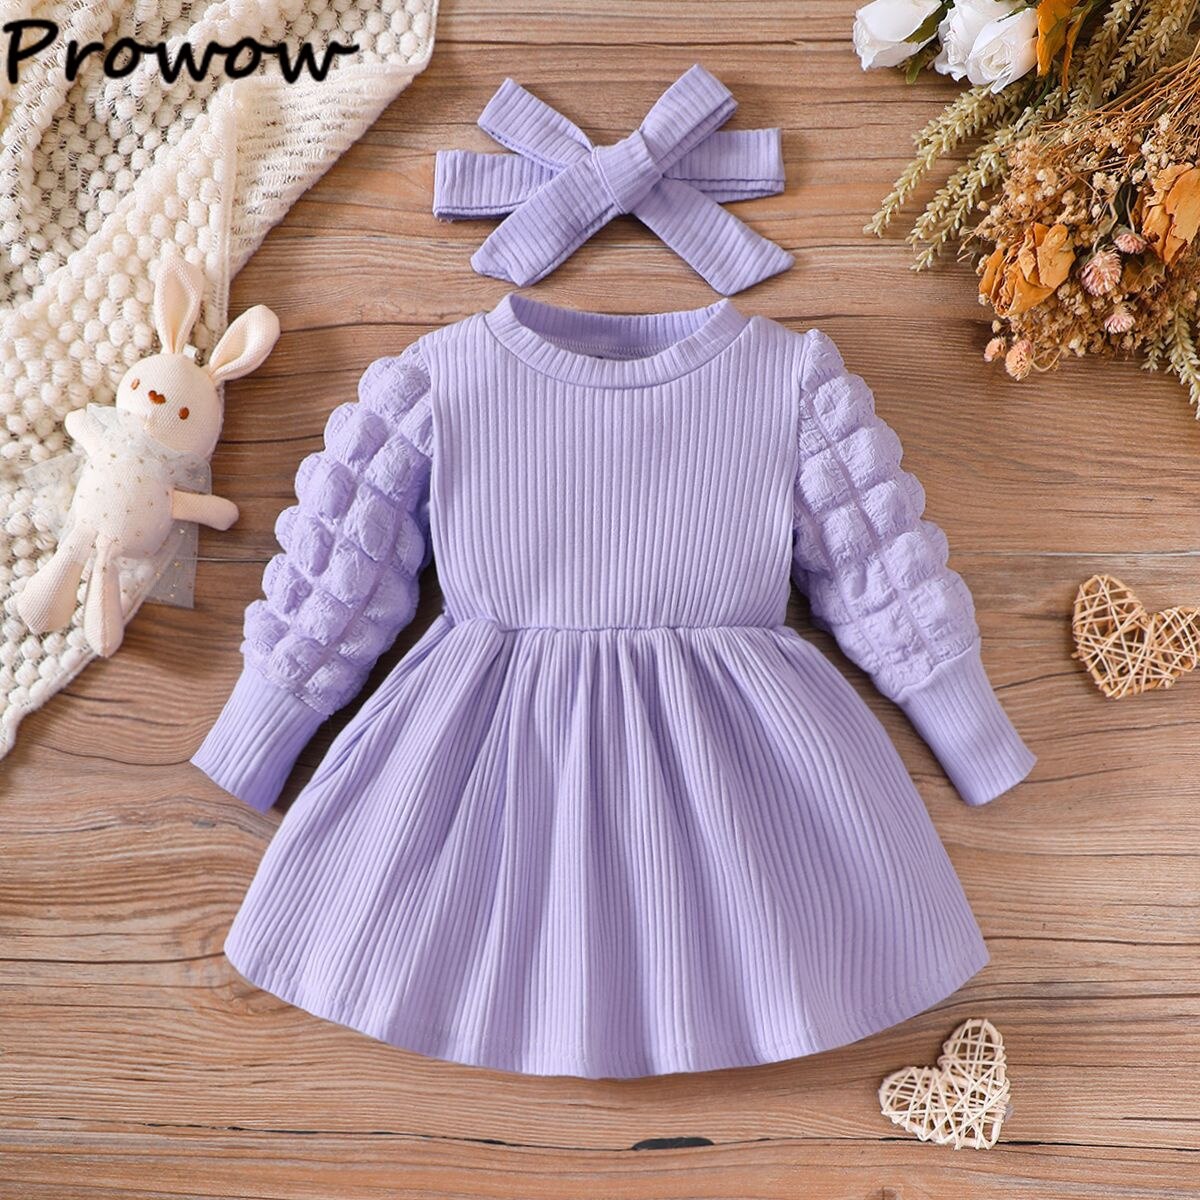 Prowow-3-24M-Baby-Dresses-Winter-Long-Puffy-Sleeve-Solid-Korean-Dress-For-Girls-With-Headband-1